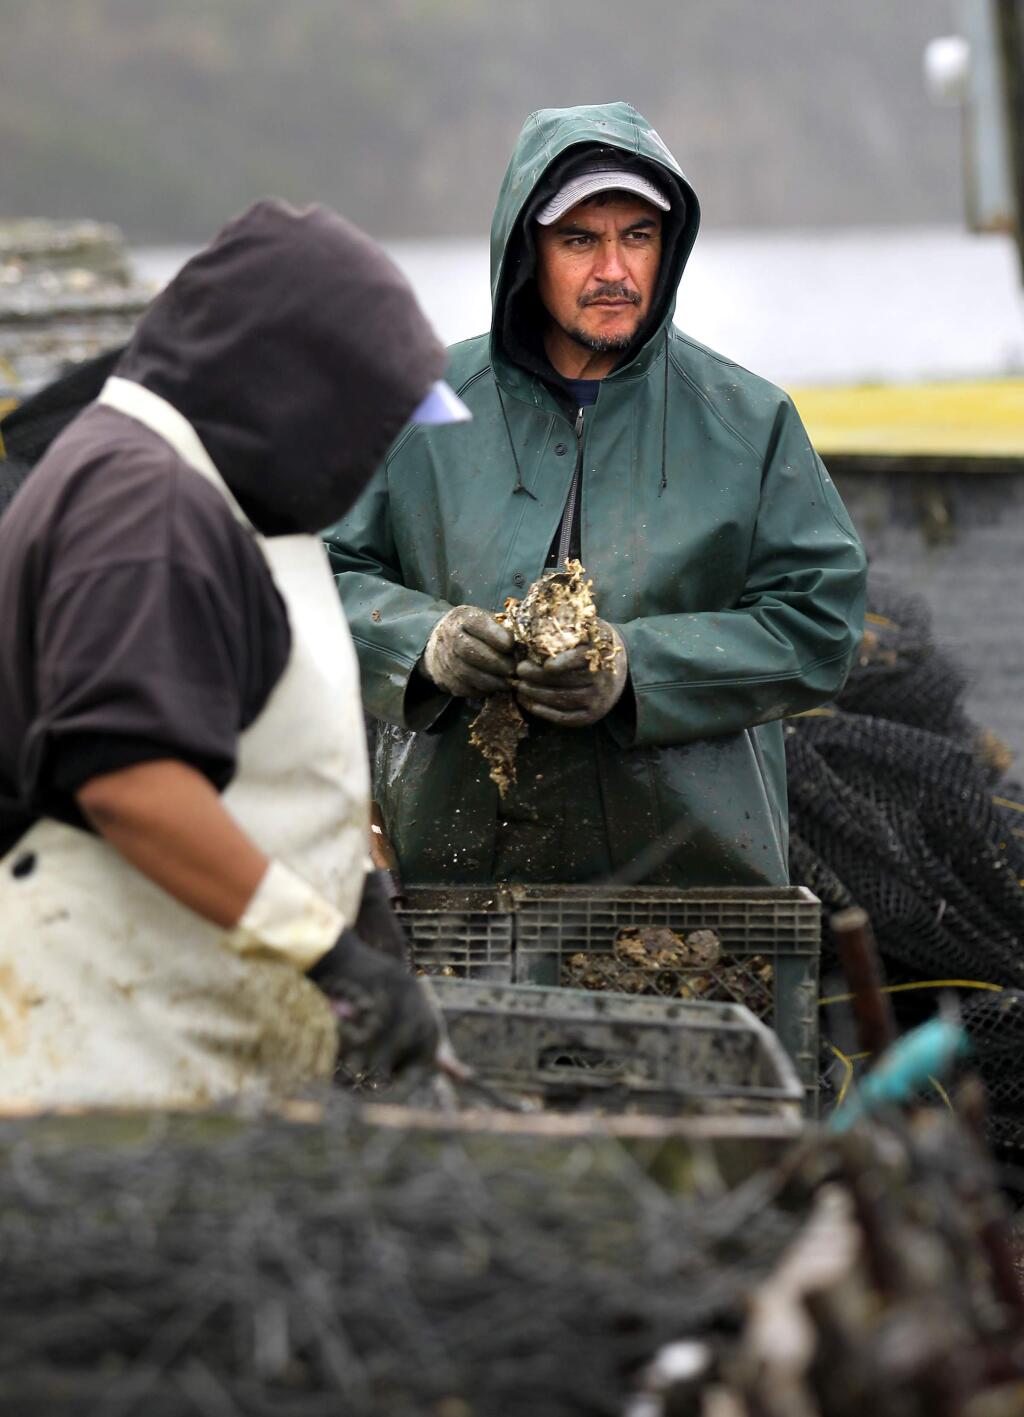 Drakes Bay Oyster Company production manager Paco Aceves processes oysters hauled out of Drakes Estero in Point Reyes National Seashore. (Photo by John Burgess/The Press Democrat)